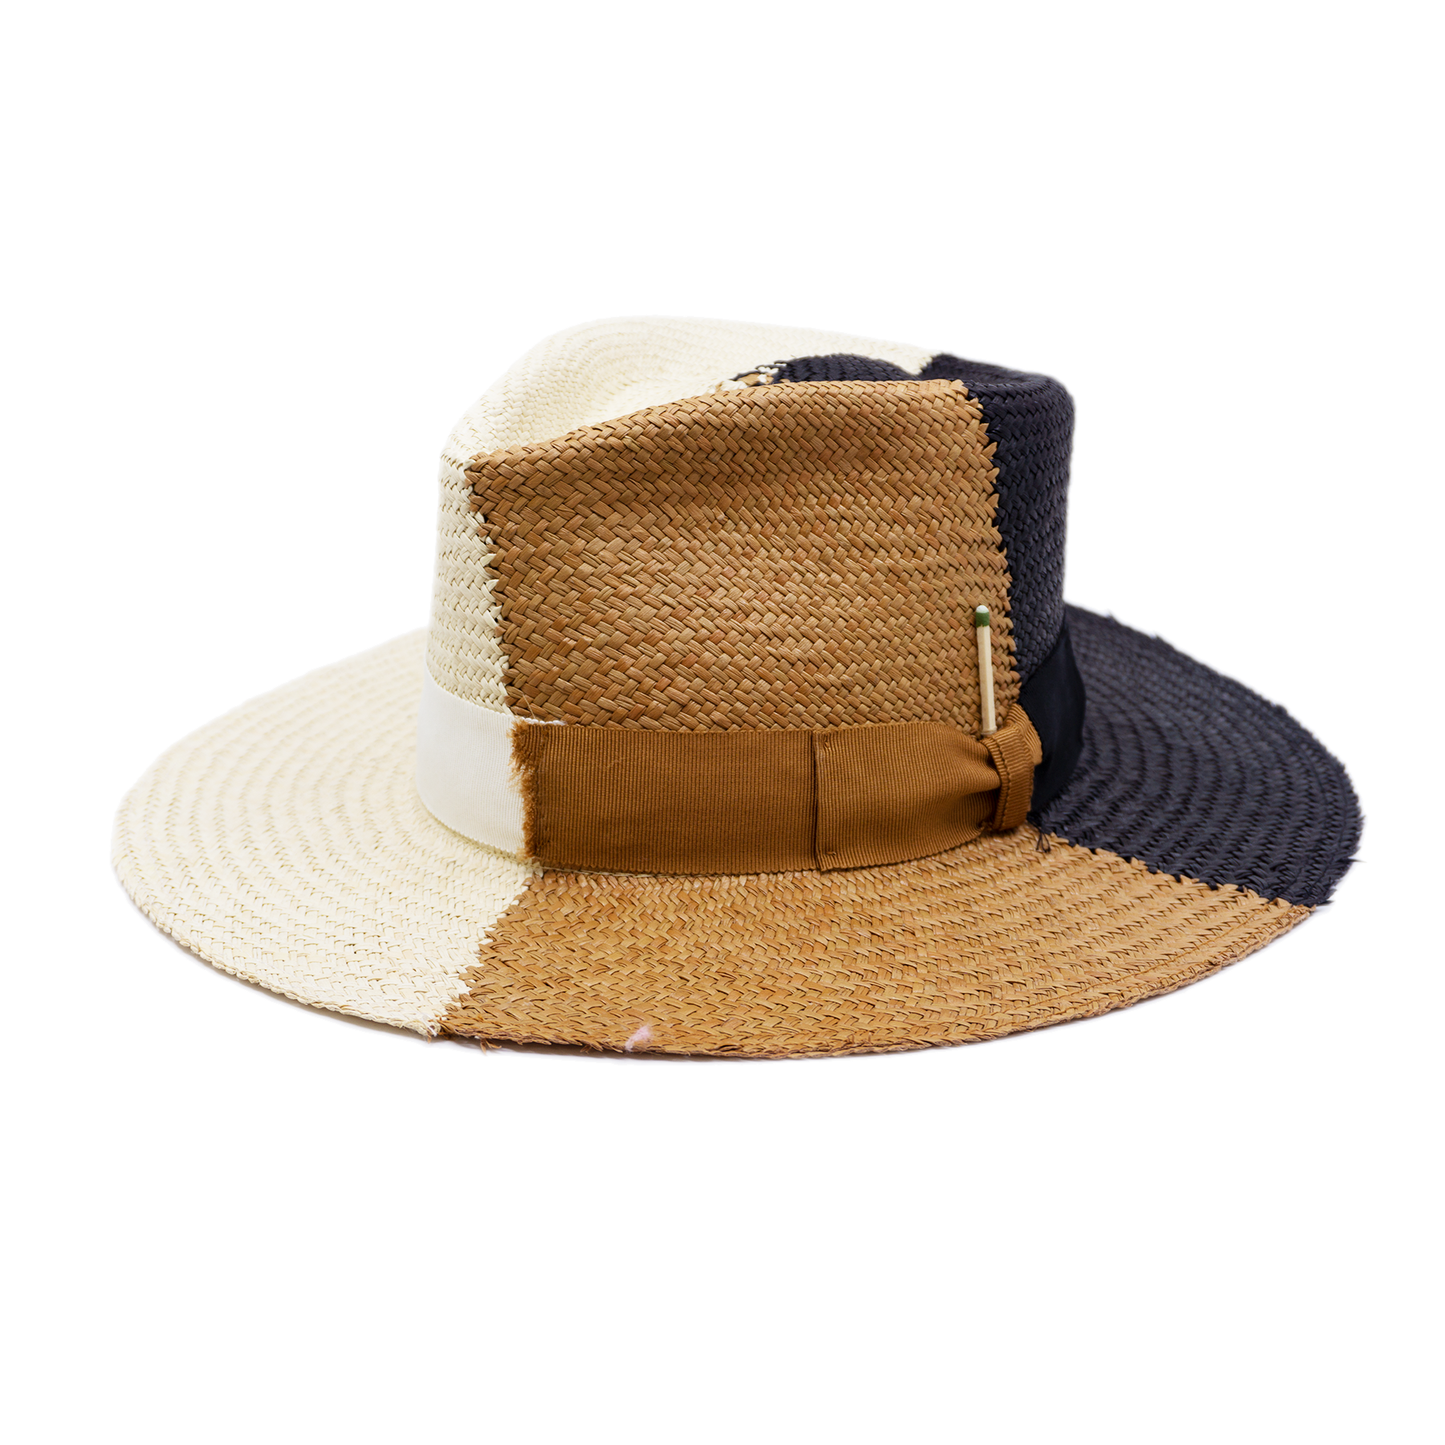 100% Ecuadorian straw in Tricolor; Natural,  Black,  and White   1 ½” Tonal grosgrain band and bow  with matching straw   Light grosgrain  fraying on band and brim    Woven in Ecuador  Lightly frayed brim  Made in USA